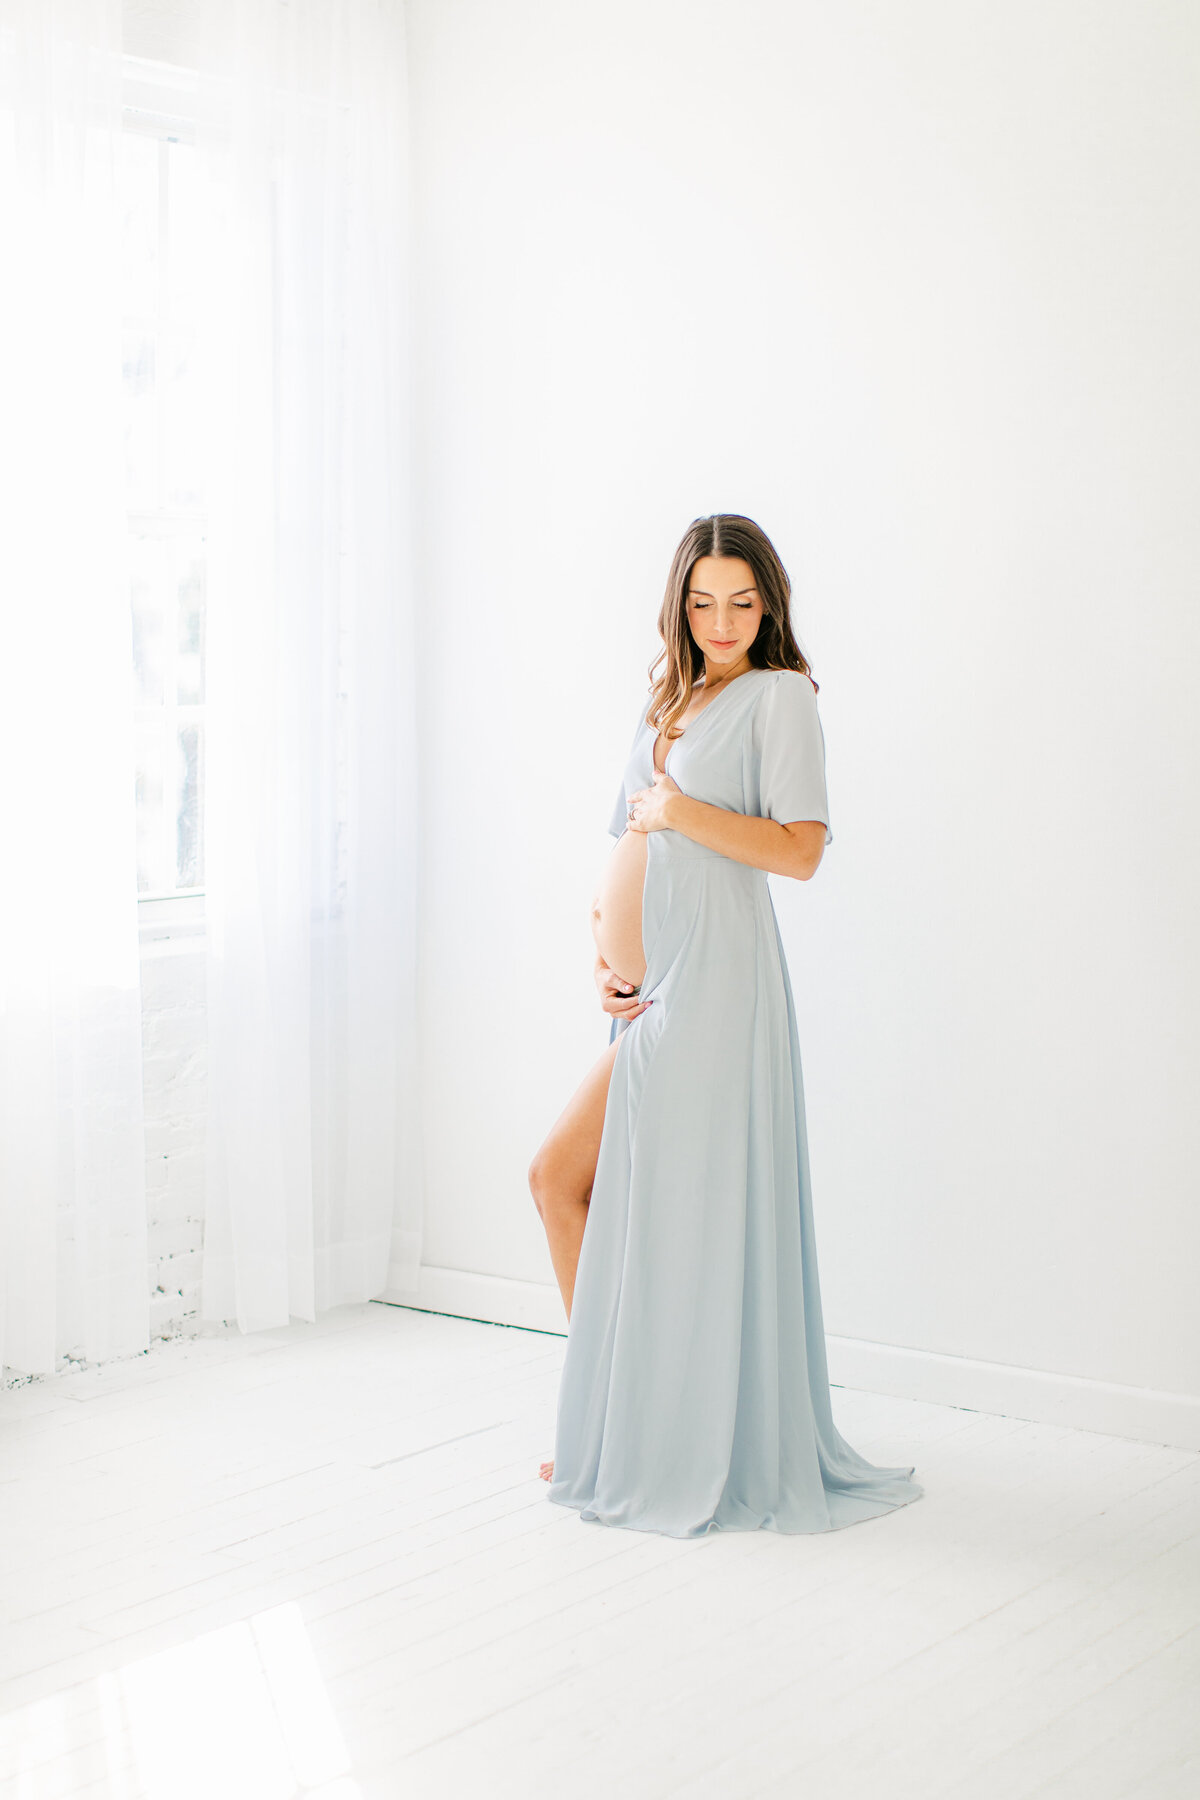 allie-ryann-photography-tampa-maternity-client-closet-34